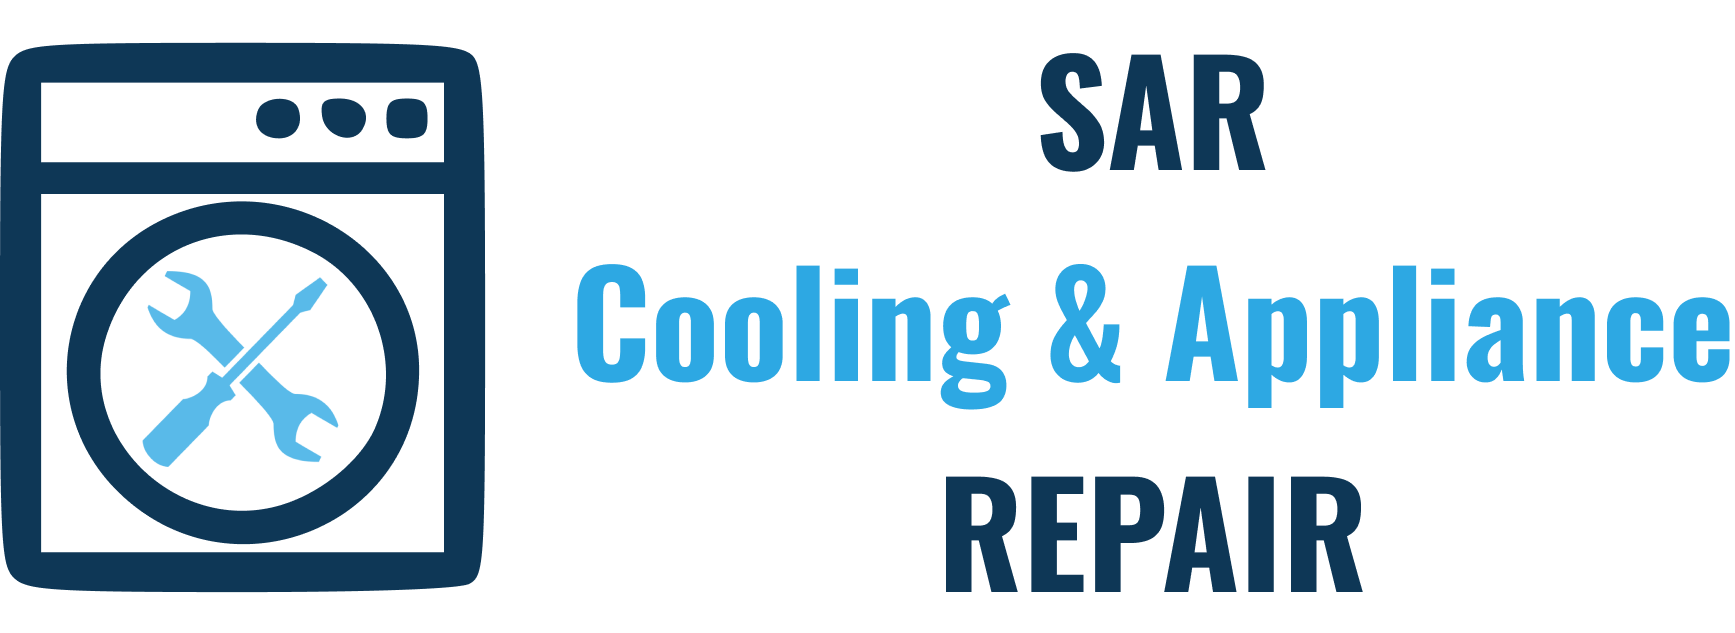 SAR Cooling and Appliance Repair Rakes in Reviews from Clients Across Tampa Bay United States